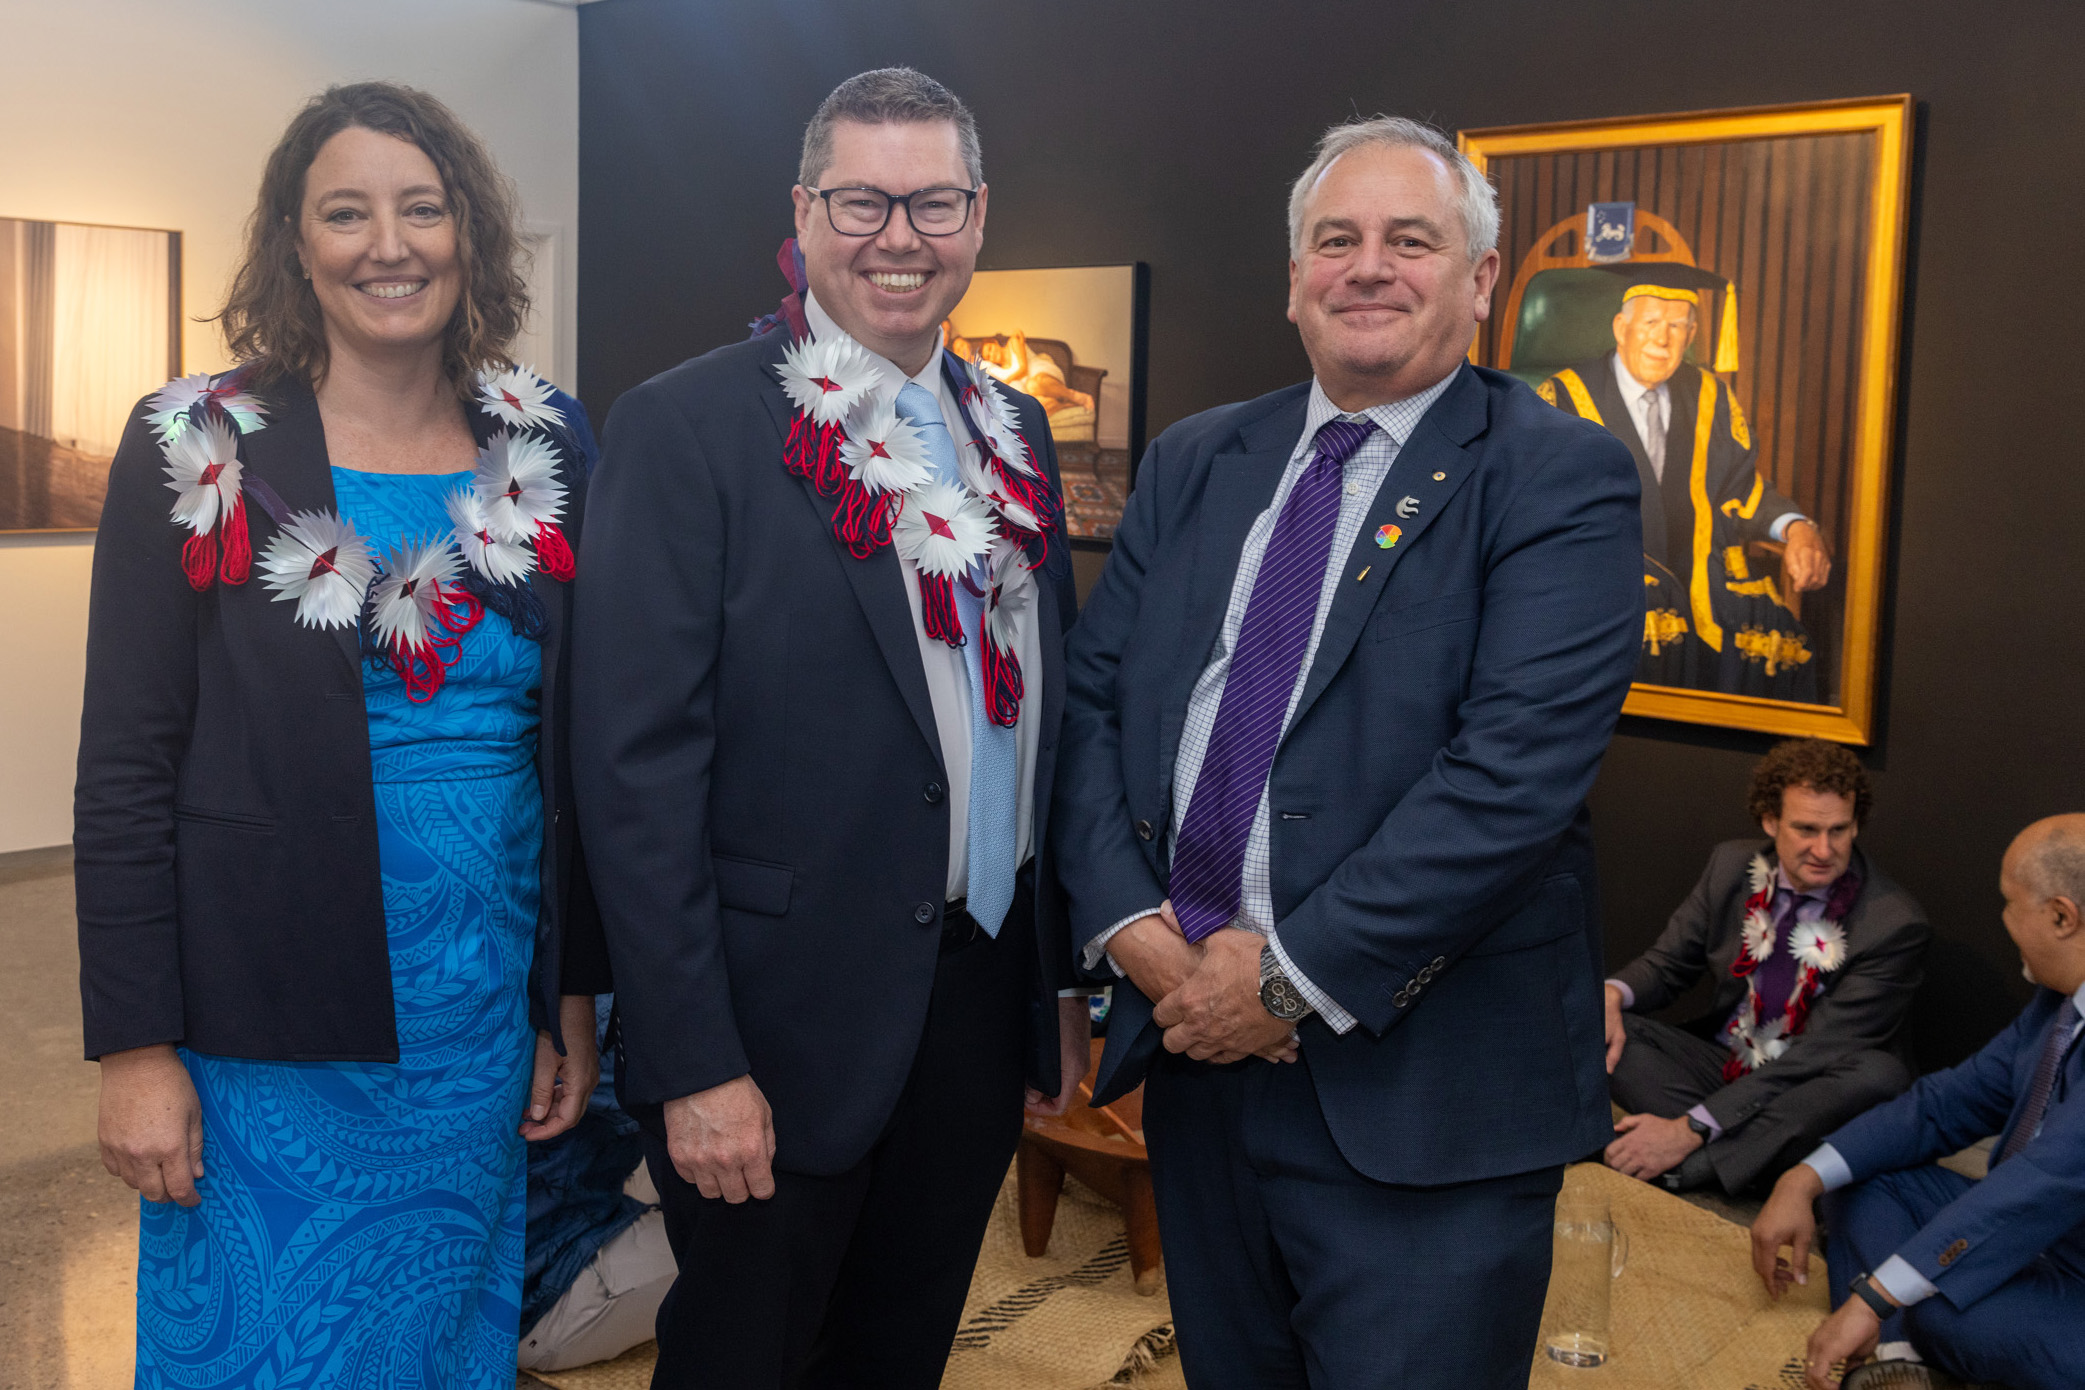 A woman in a blue dress stands next to two men wearing suits. The man in the middle has a flower lei and wears glasses. The man on the right has a purple tie. There are two men sitting on the ground behind them and a portrait of the Chancellor in the background